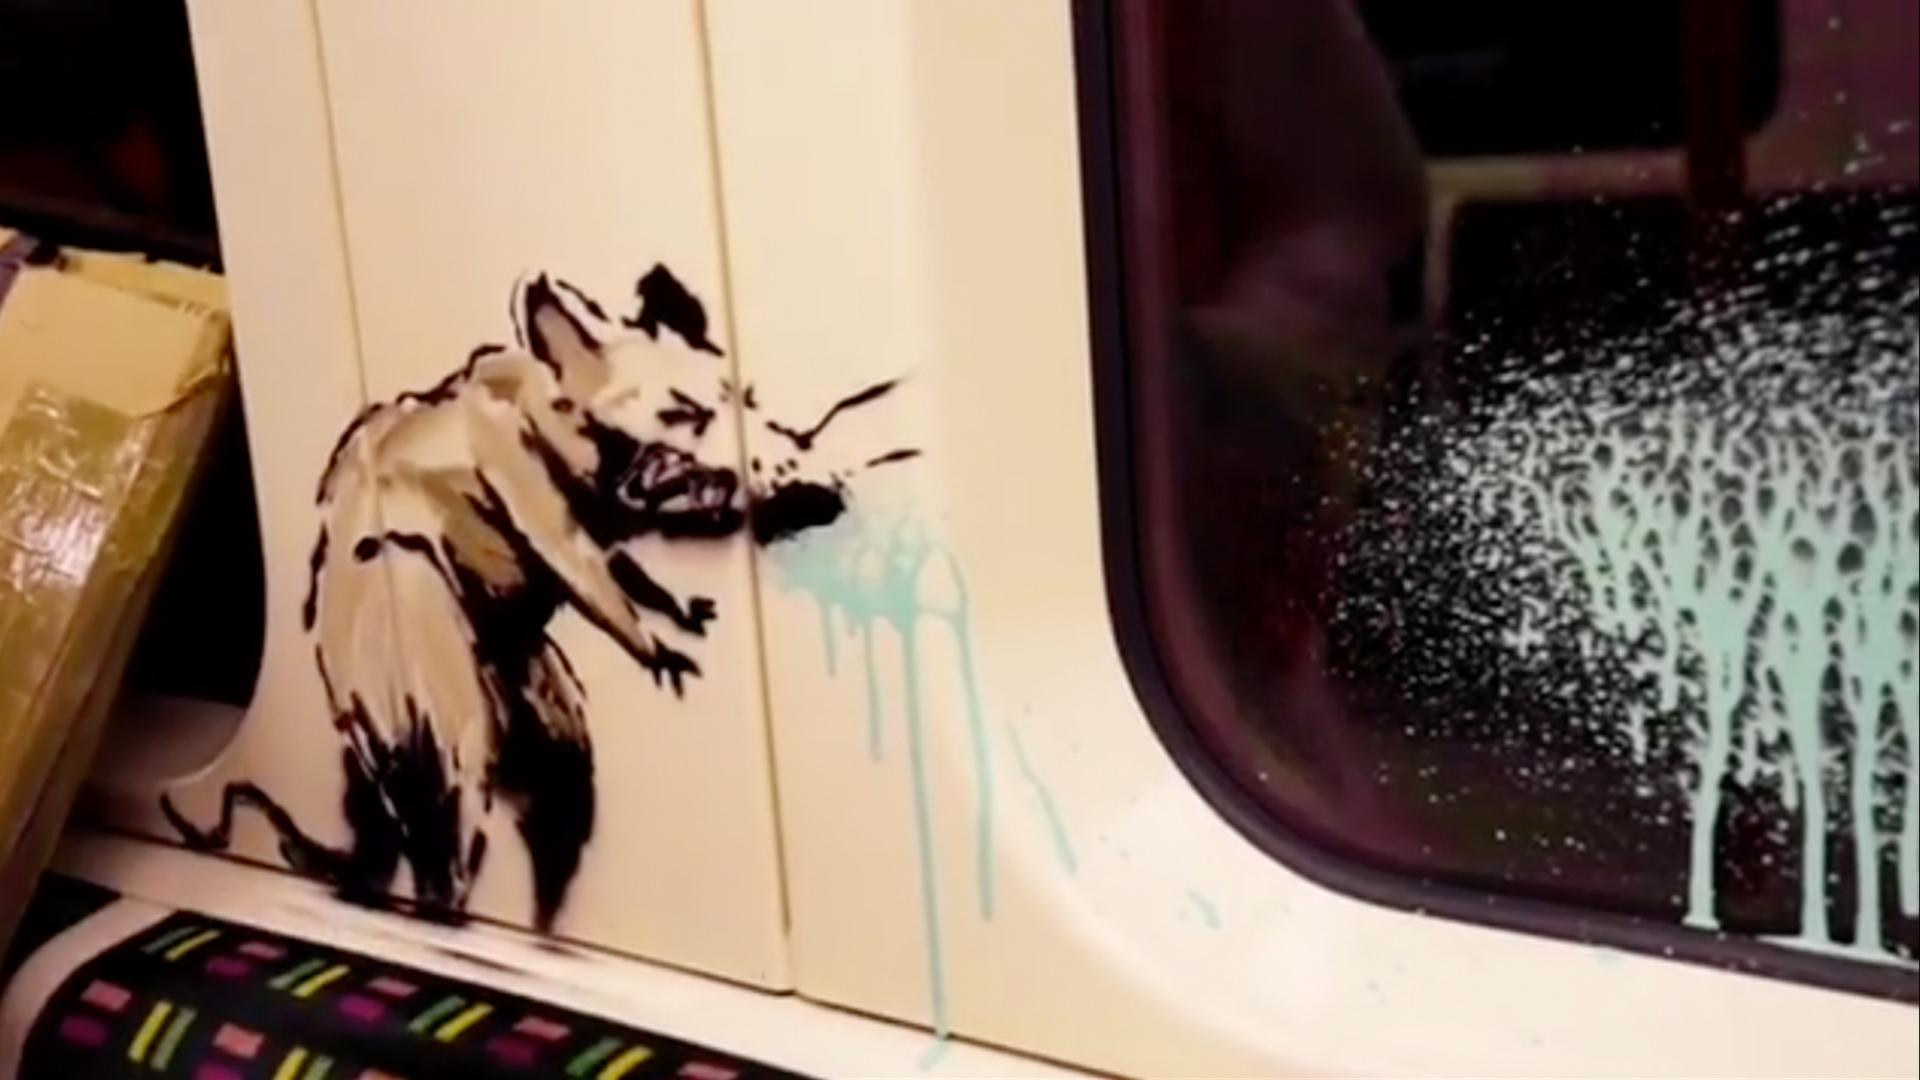 A stenciled rat appears to be sneezing.